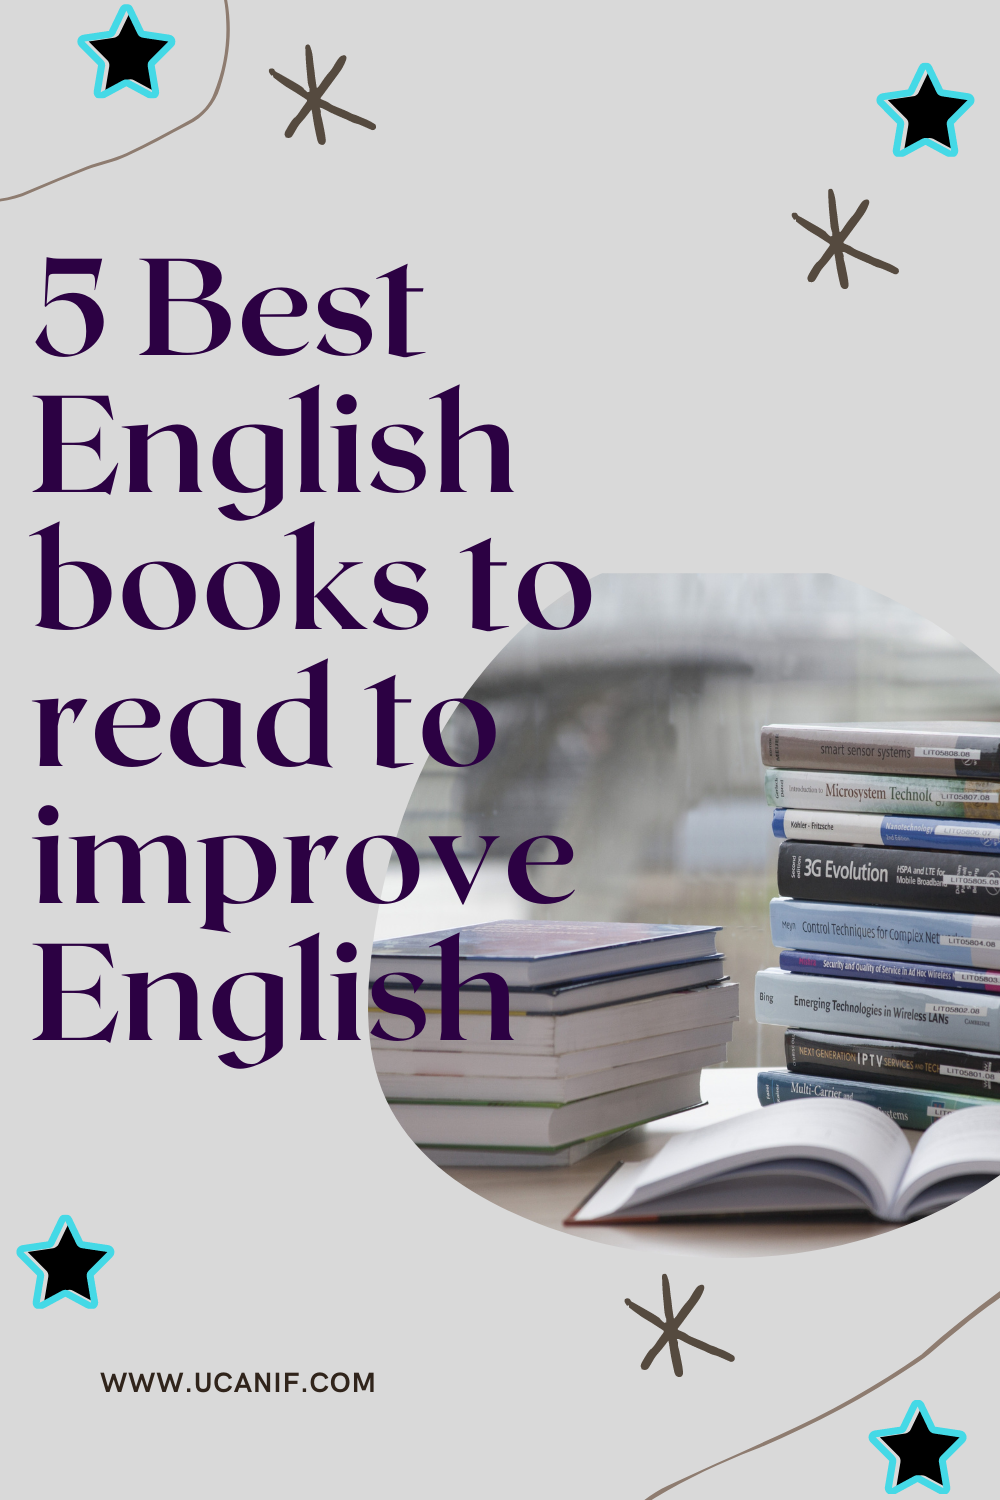 Best English books to read to improve English